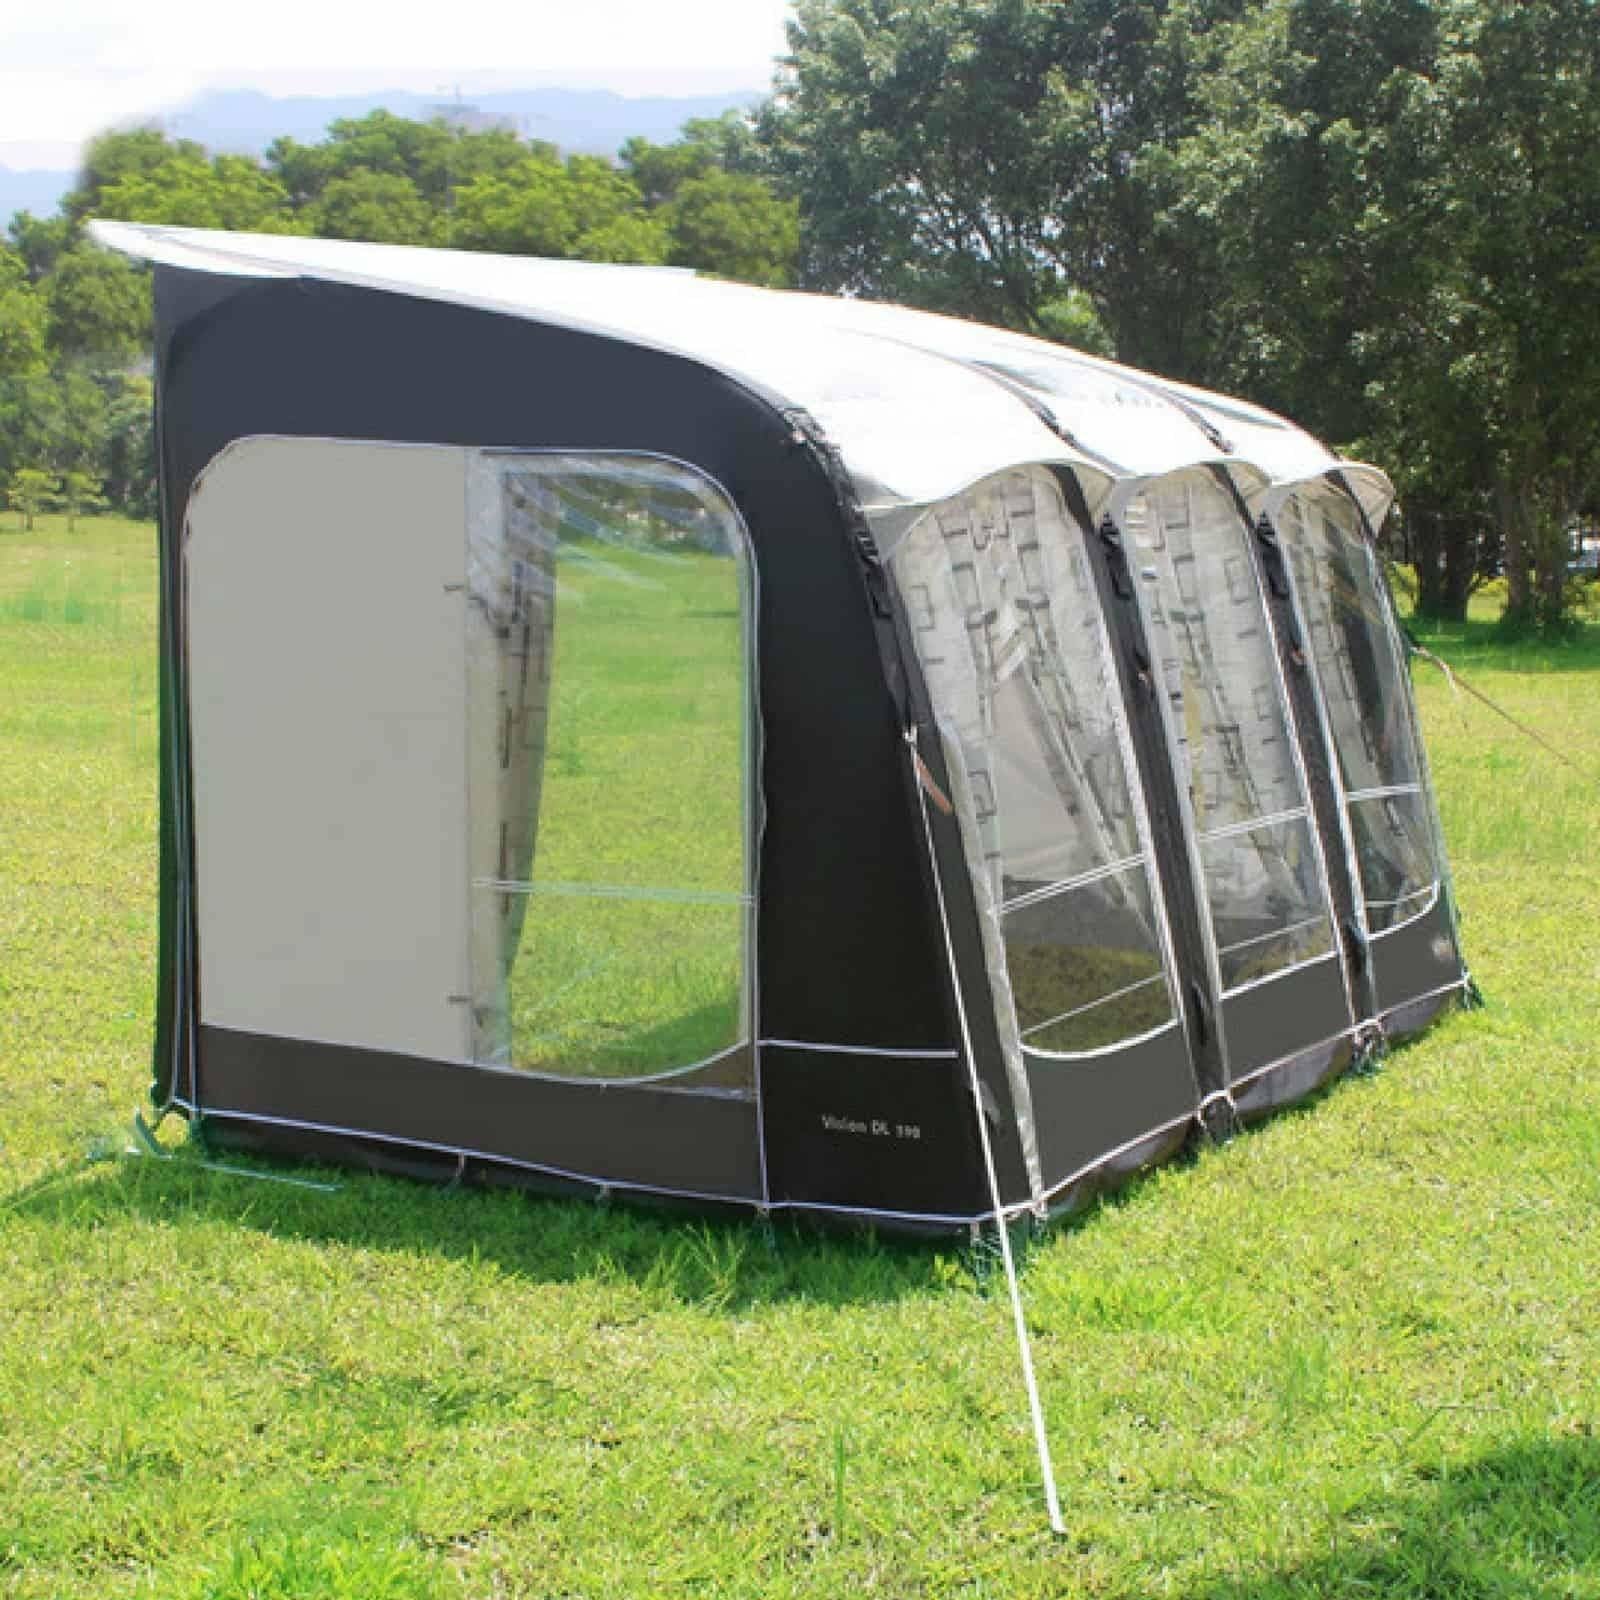 Camptech AirDream Vision DL 300 Inflatable Air Porch Caravan Awning + Free Straps 2019 made by CampTech. A Air Awning sold by Quality Caravan Awnings